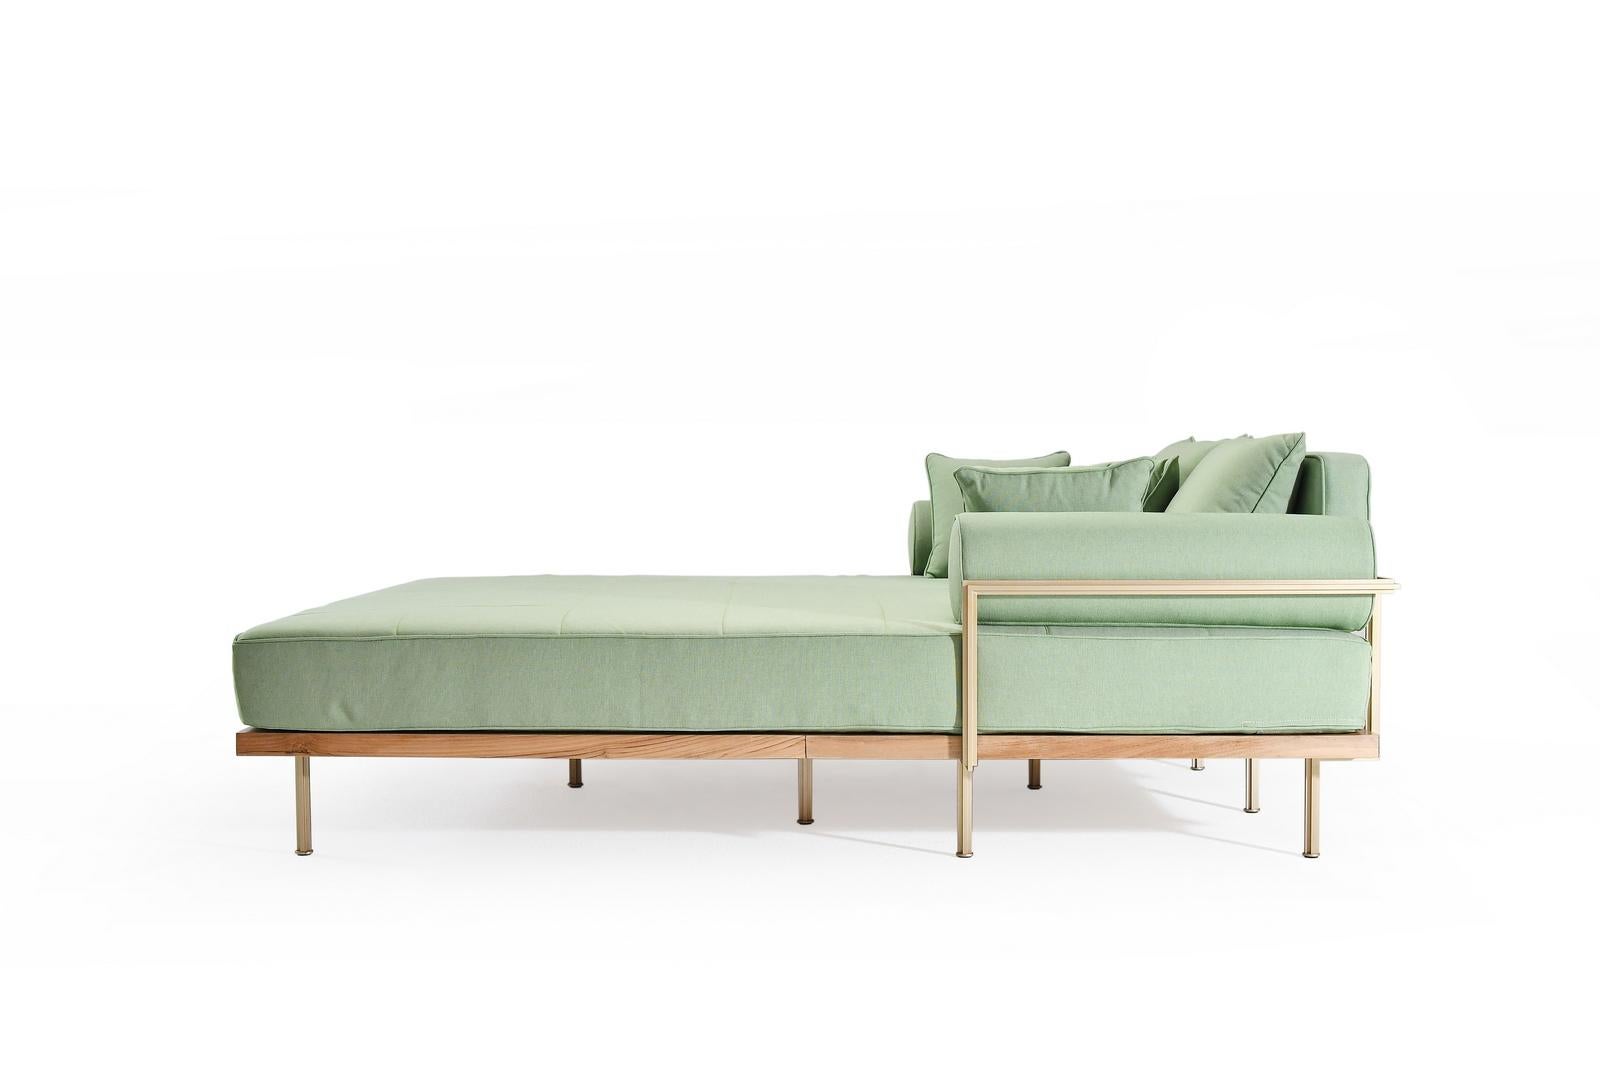 Hand-Crafted Bespoke Outdoor Lounge Bed in Brass & Bleached Hardwood Frame, by P. Tendercool For Sale